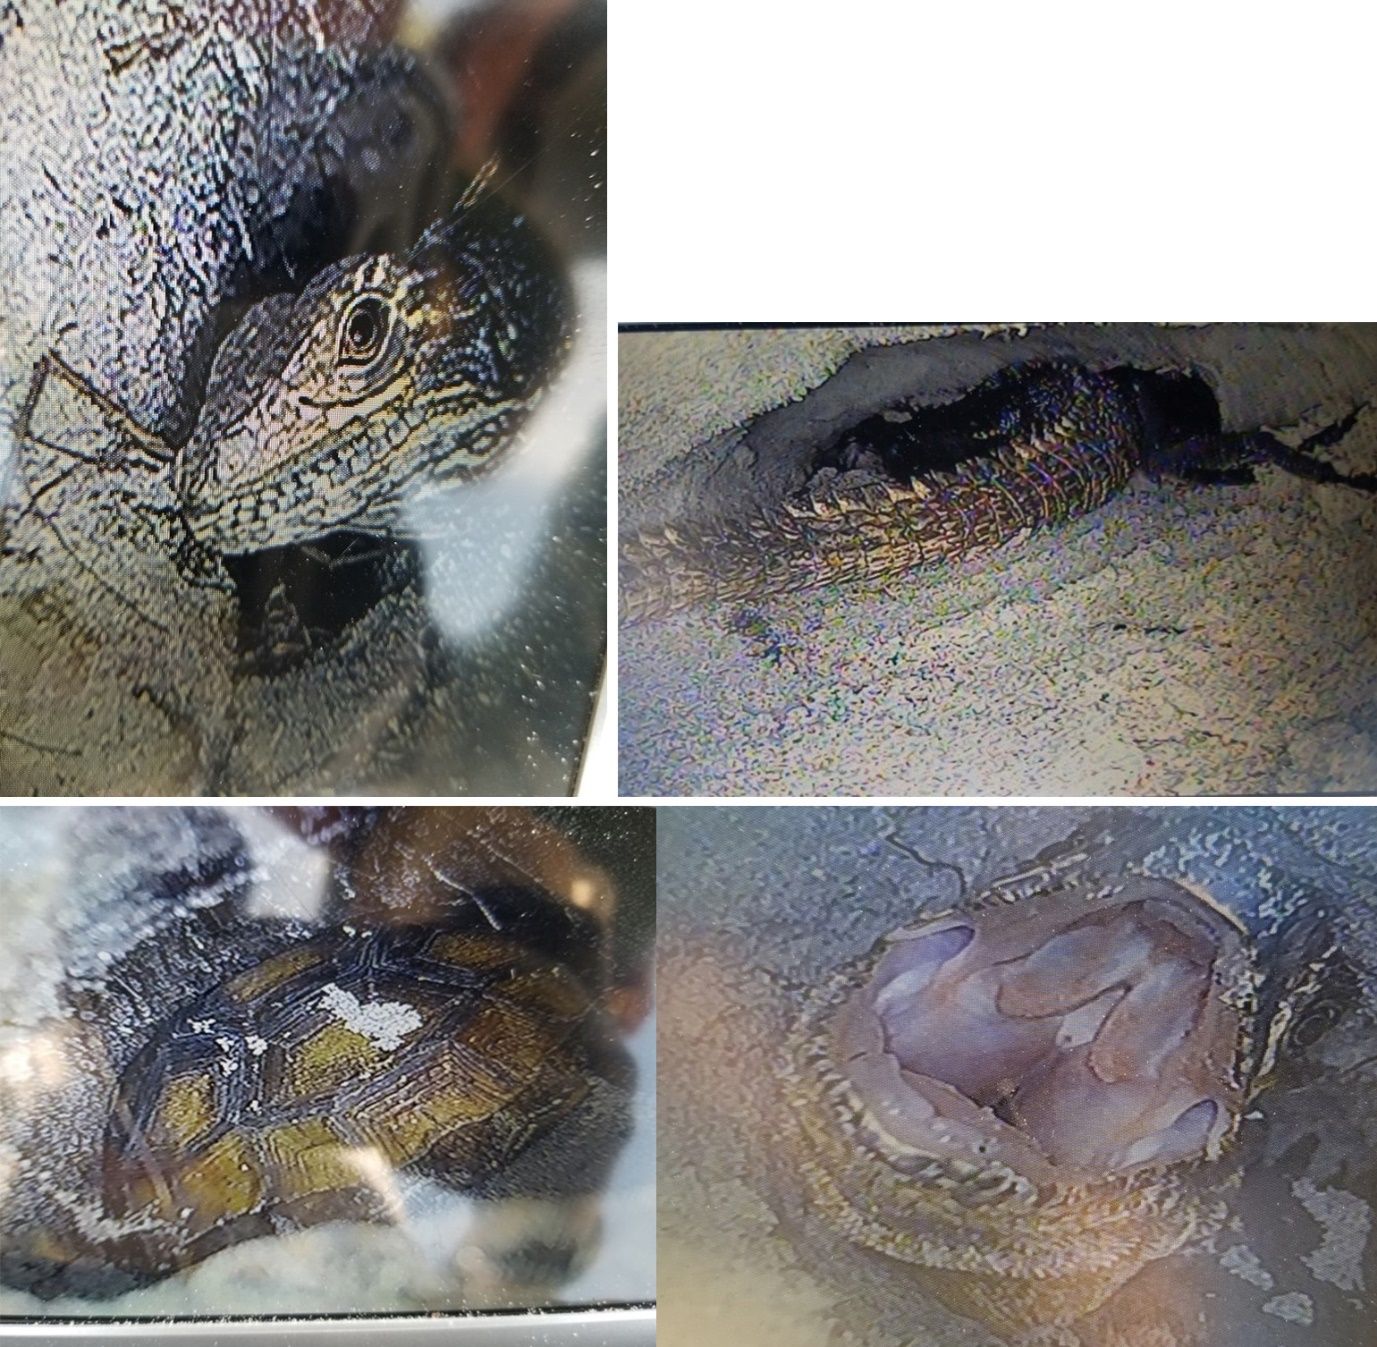 Black spiny-tailed iguanas and juvenile gopher tortoise inside tortoise burrows on Gasparilla Island. Images are photos of the burrow-scope camera viewing screen. From top to bottom, Iguana face; iguana tail, body partially buried; rear of juvenile tortoise shell; and iguana gaping mouth after being nudged with camera scope on Gasparilla Island. 